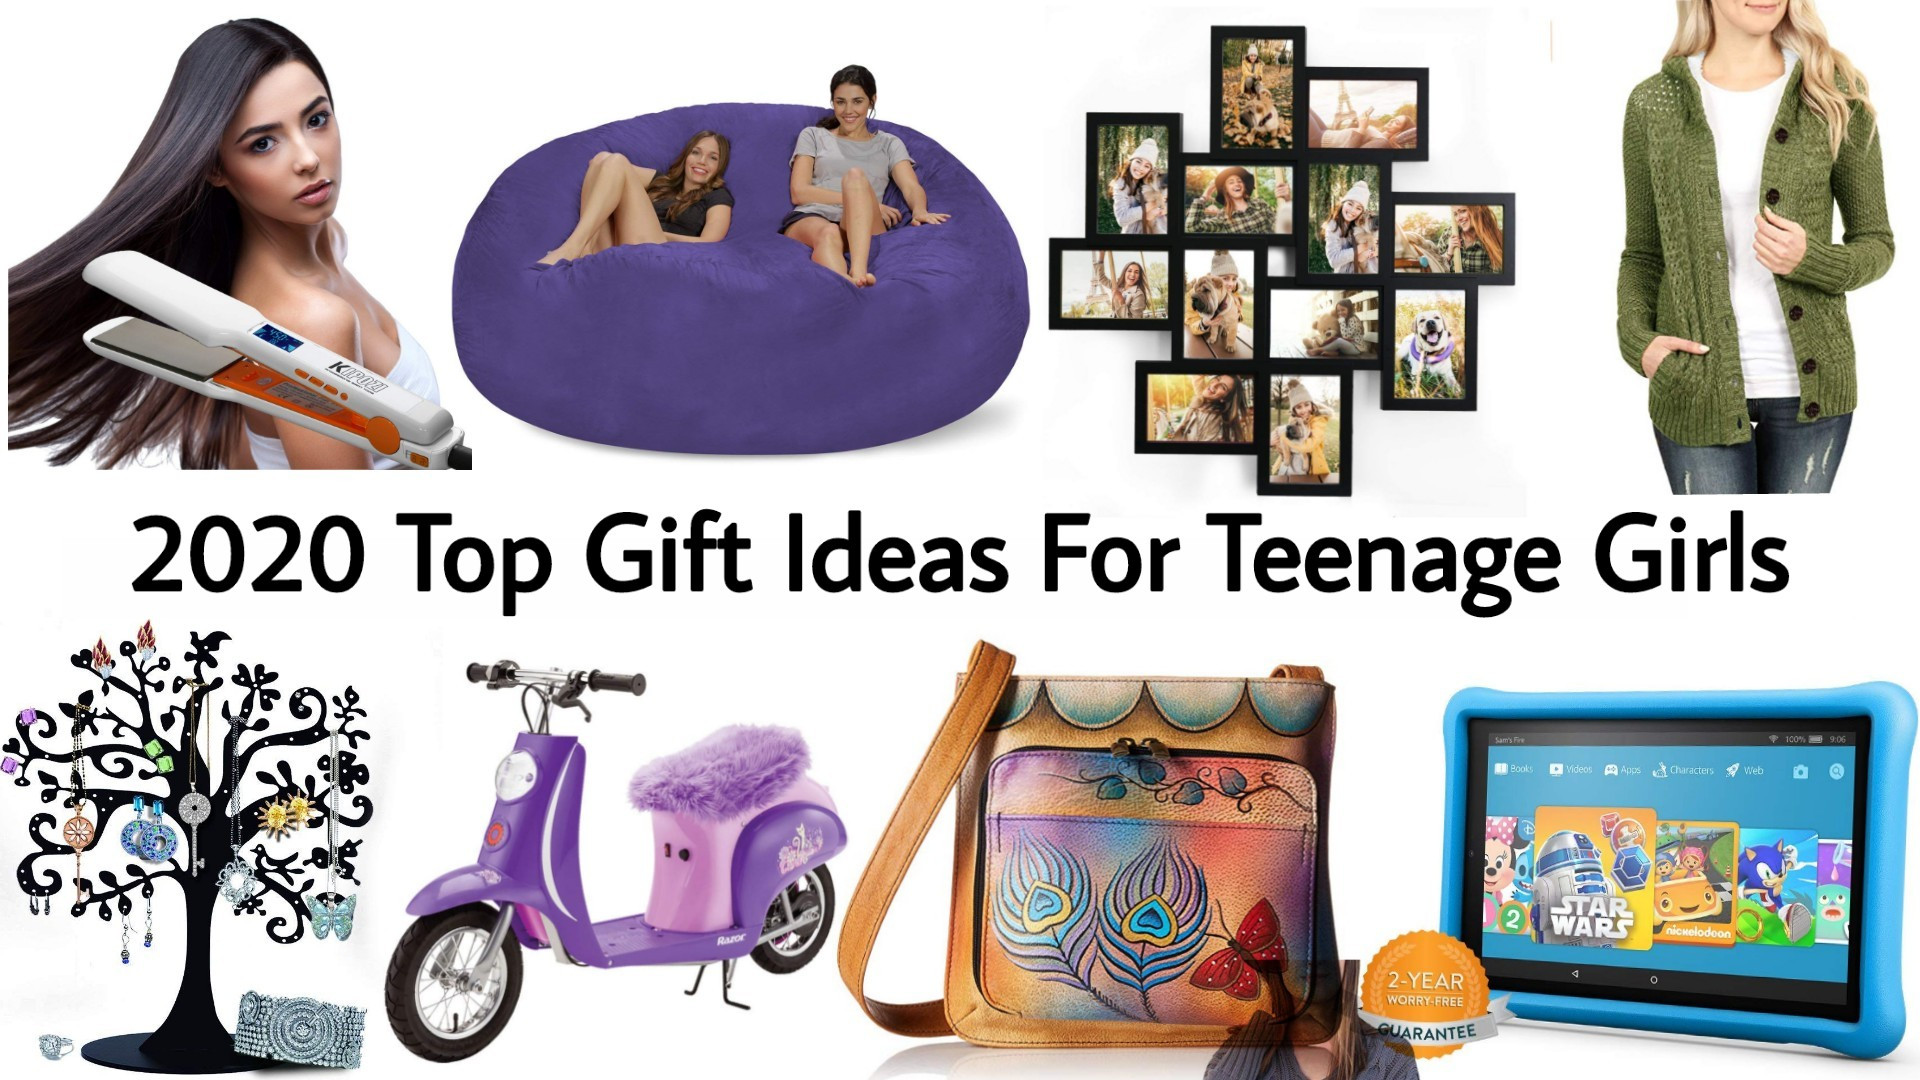 Christmas Gift Ideas 2020 For Teen Girls
 Best Christmas Gifts for Teenage Girls 2020 Top Birthday